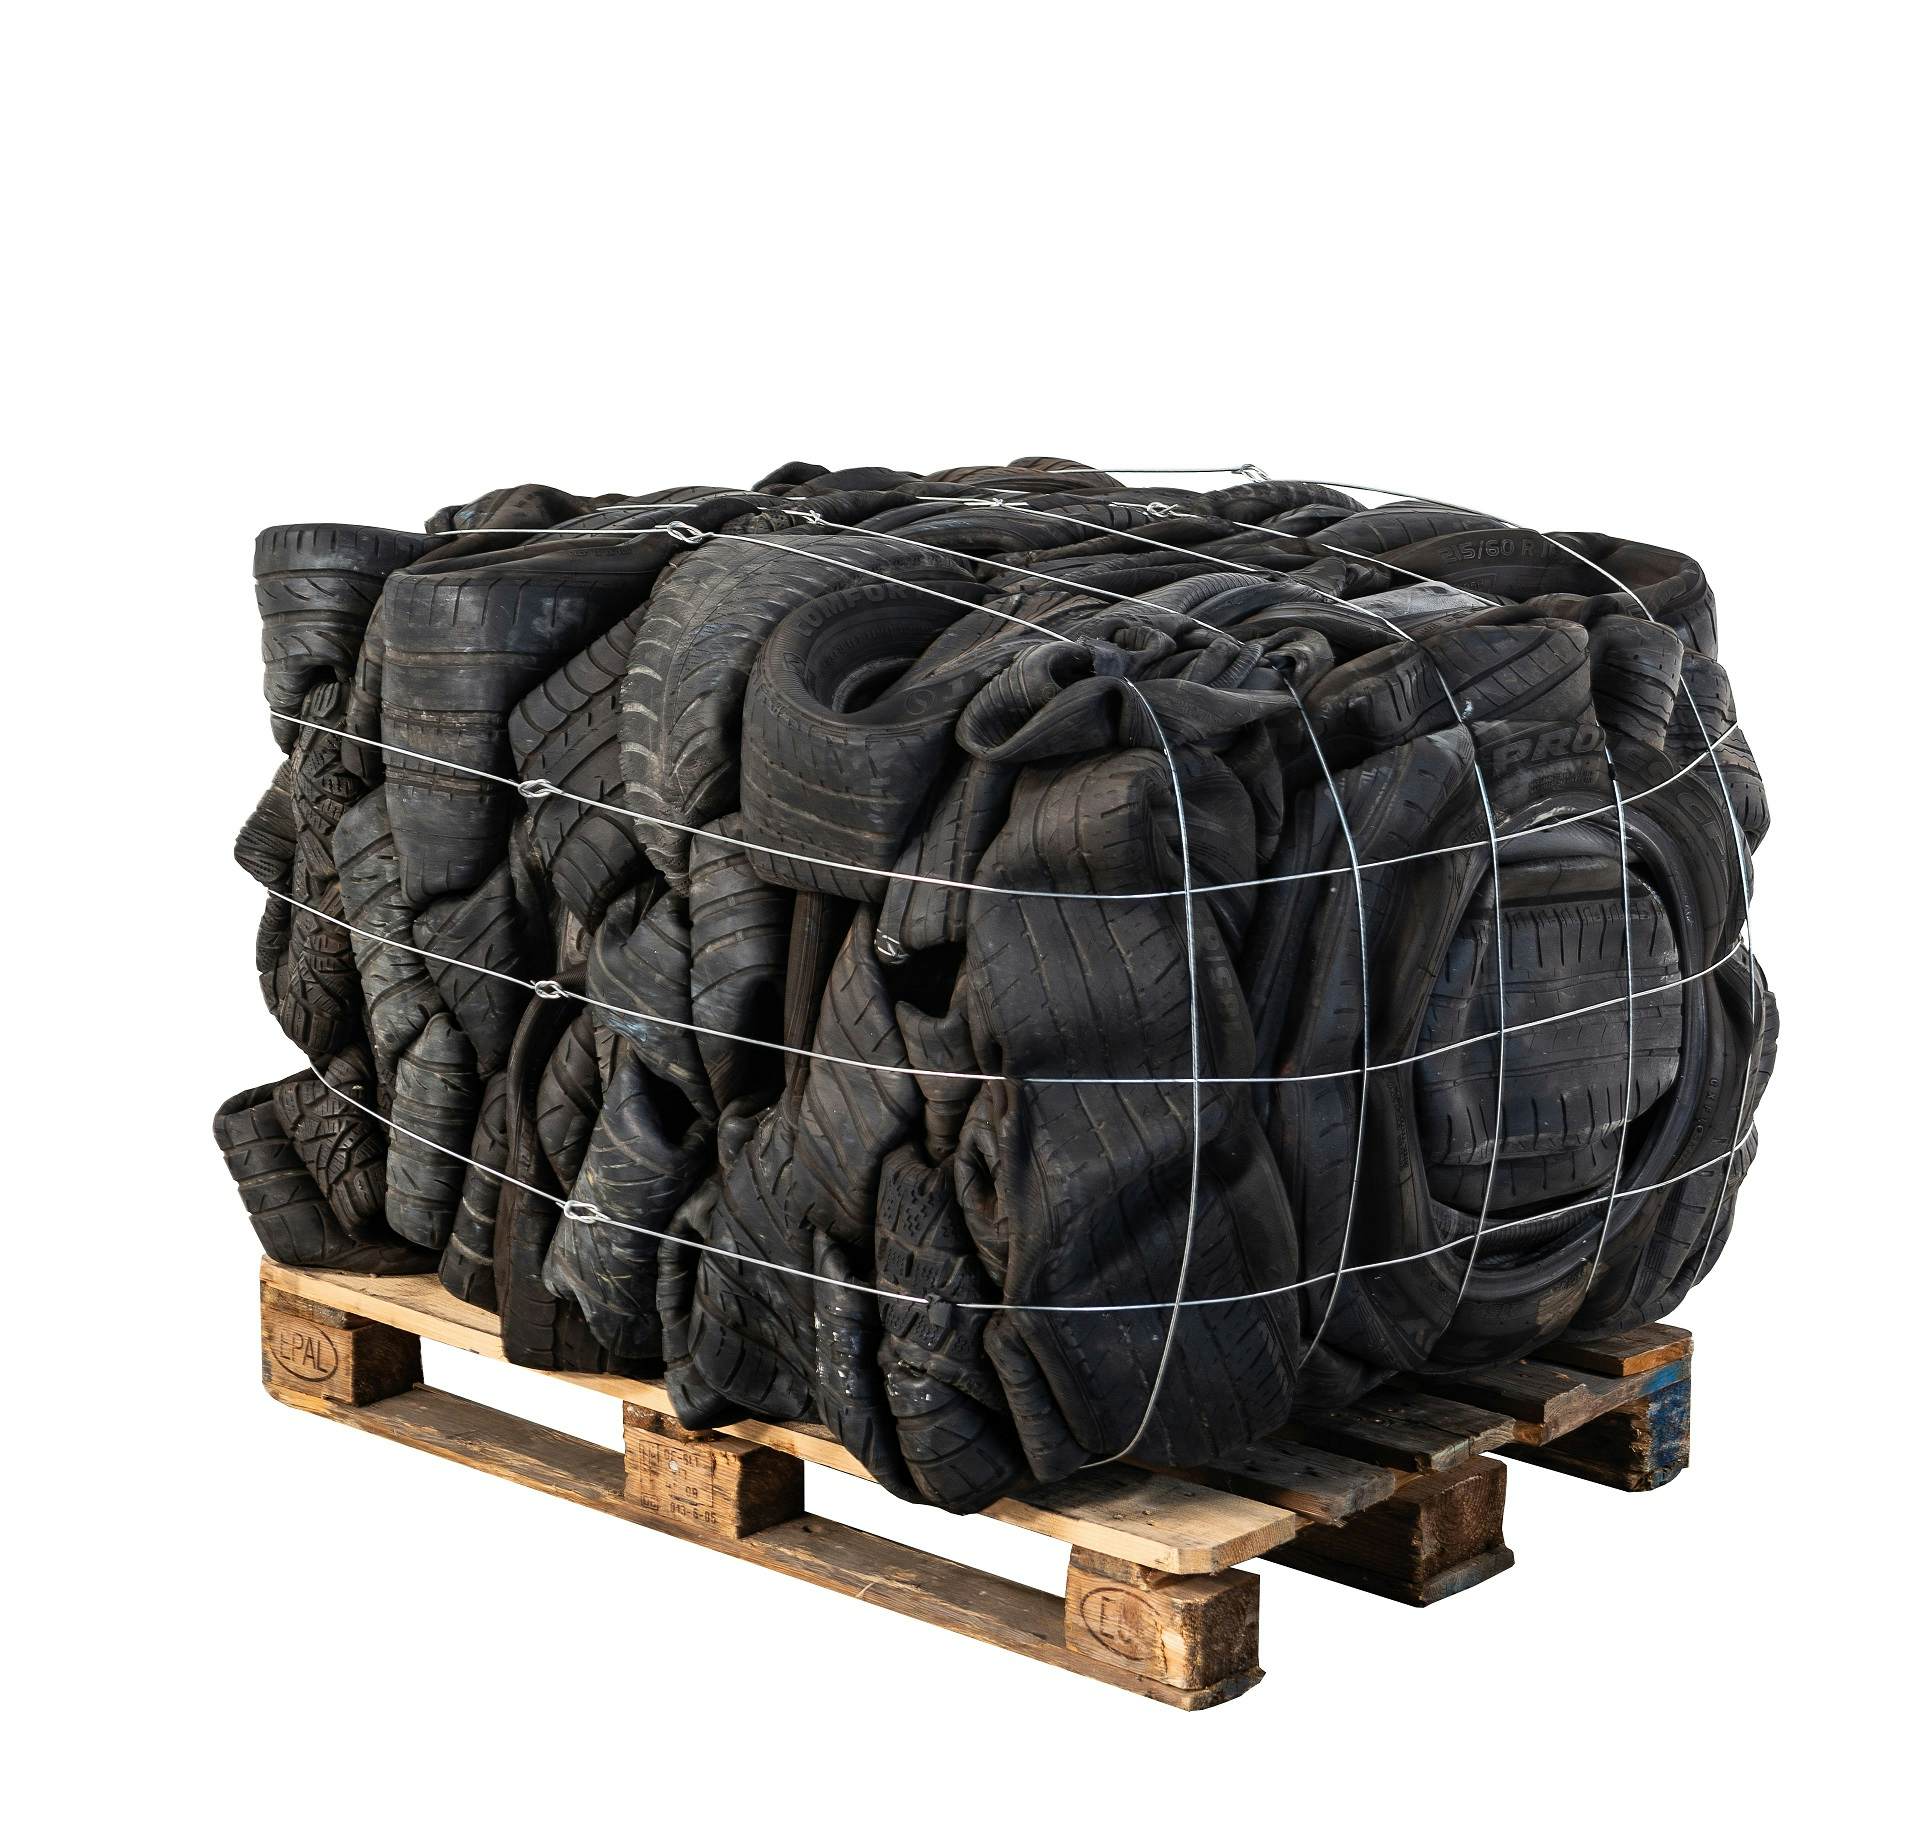 Bale of car tires from AP42F